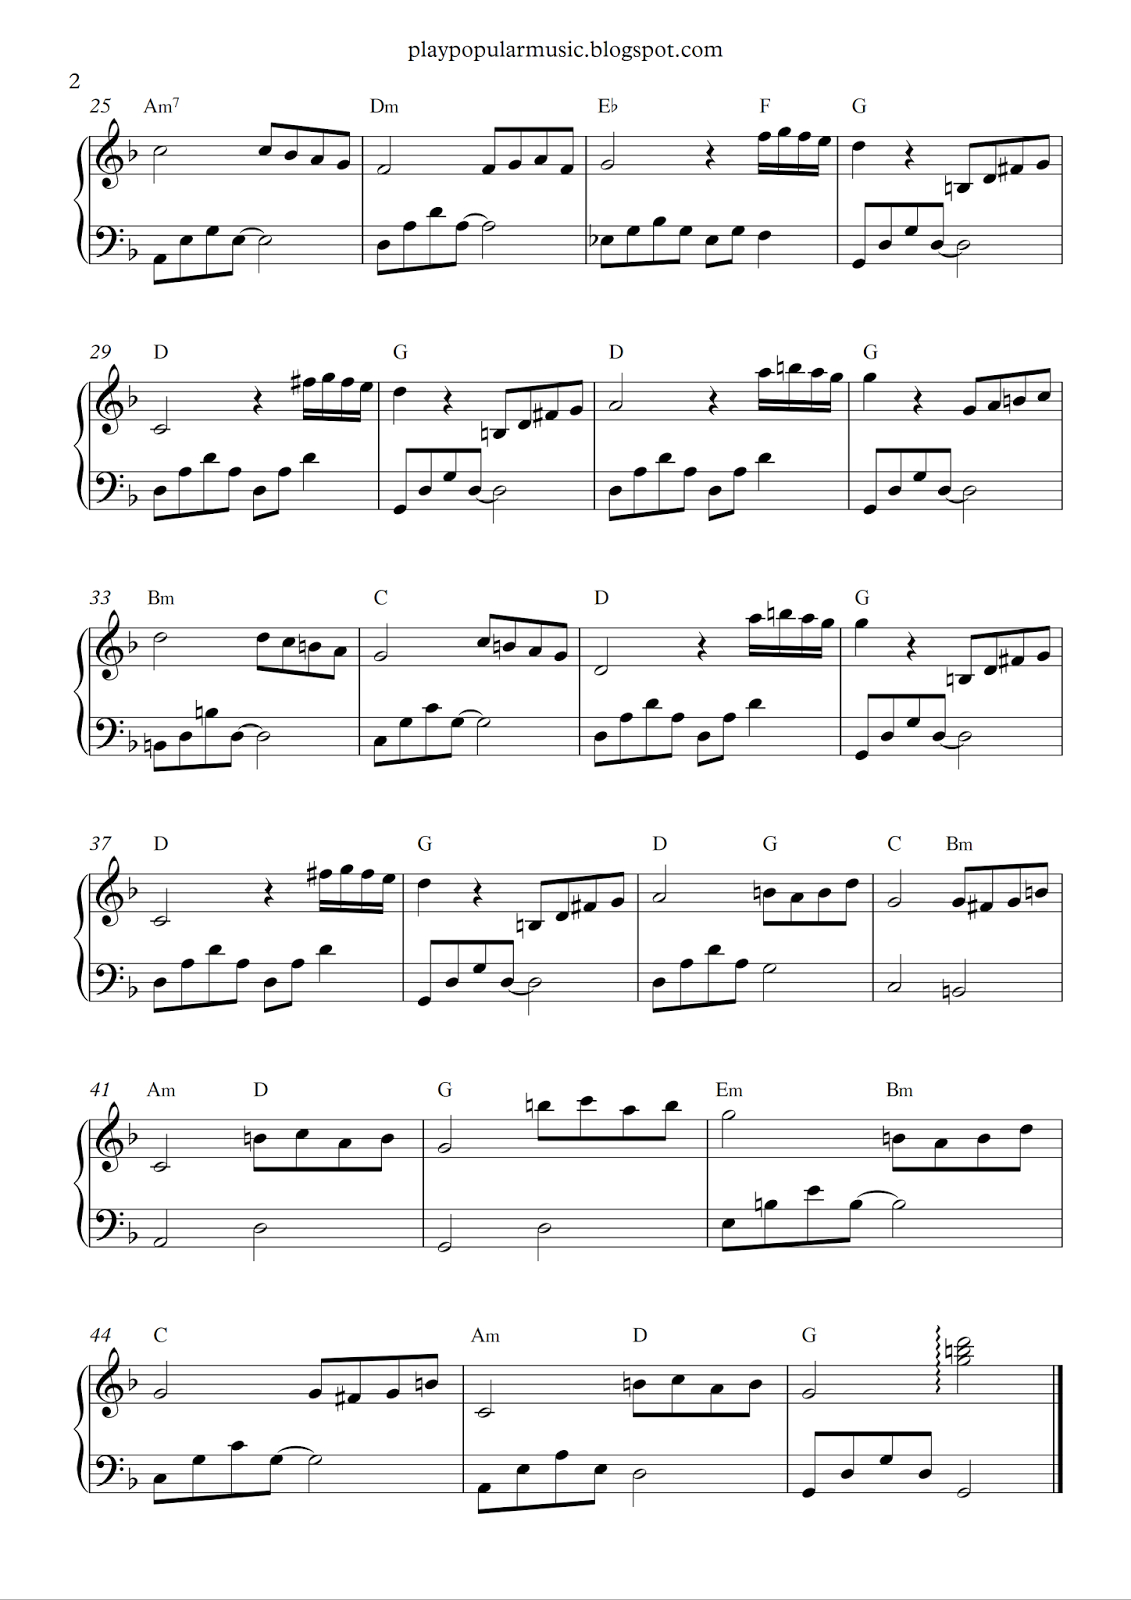 Free Piano Sheet Music: Beauty And The Beast.pdf Tale As Old As Time - Beauty And The Beast Piano Sheet Music Free Printable